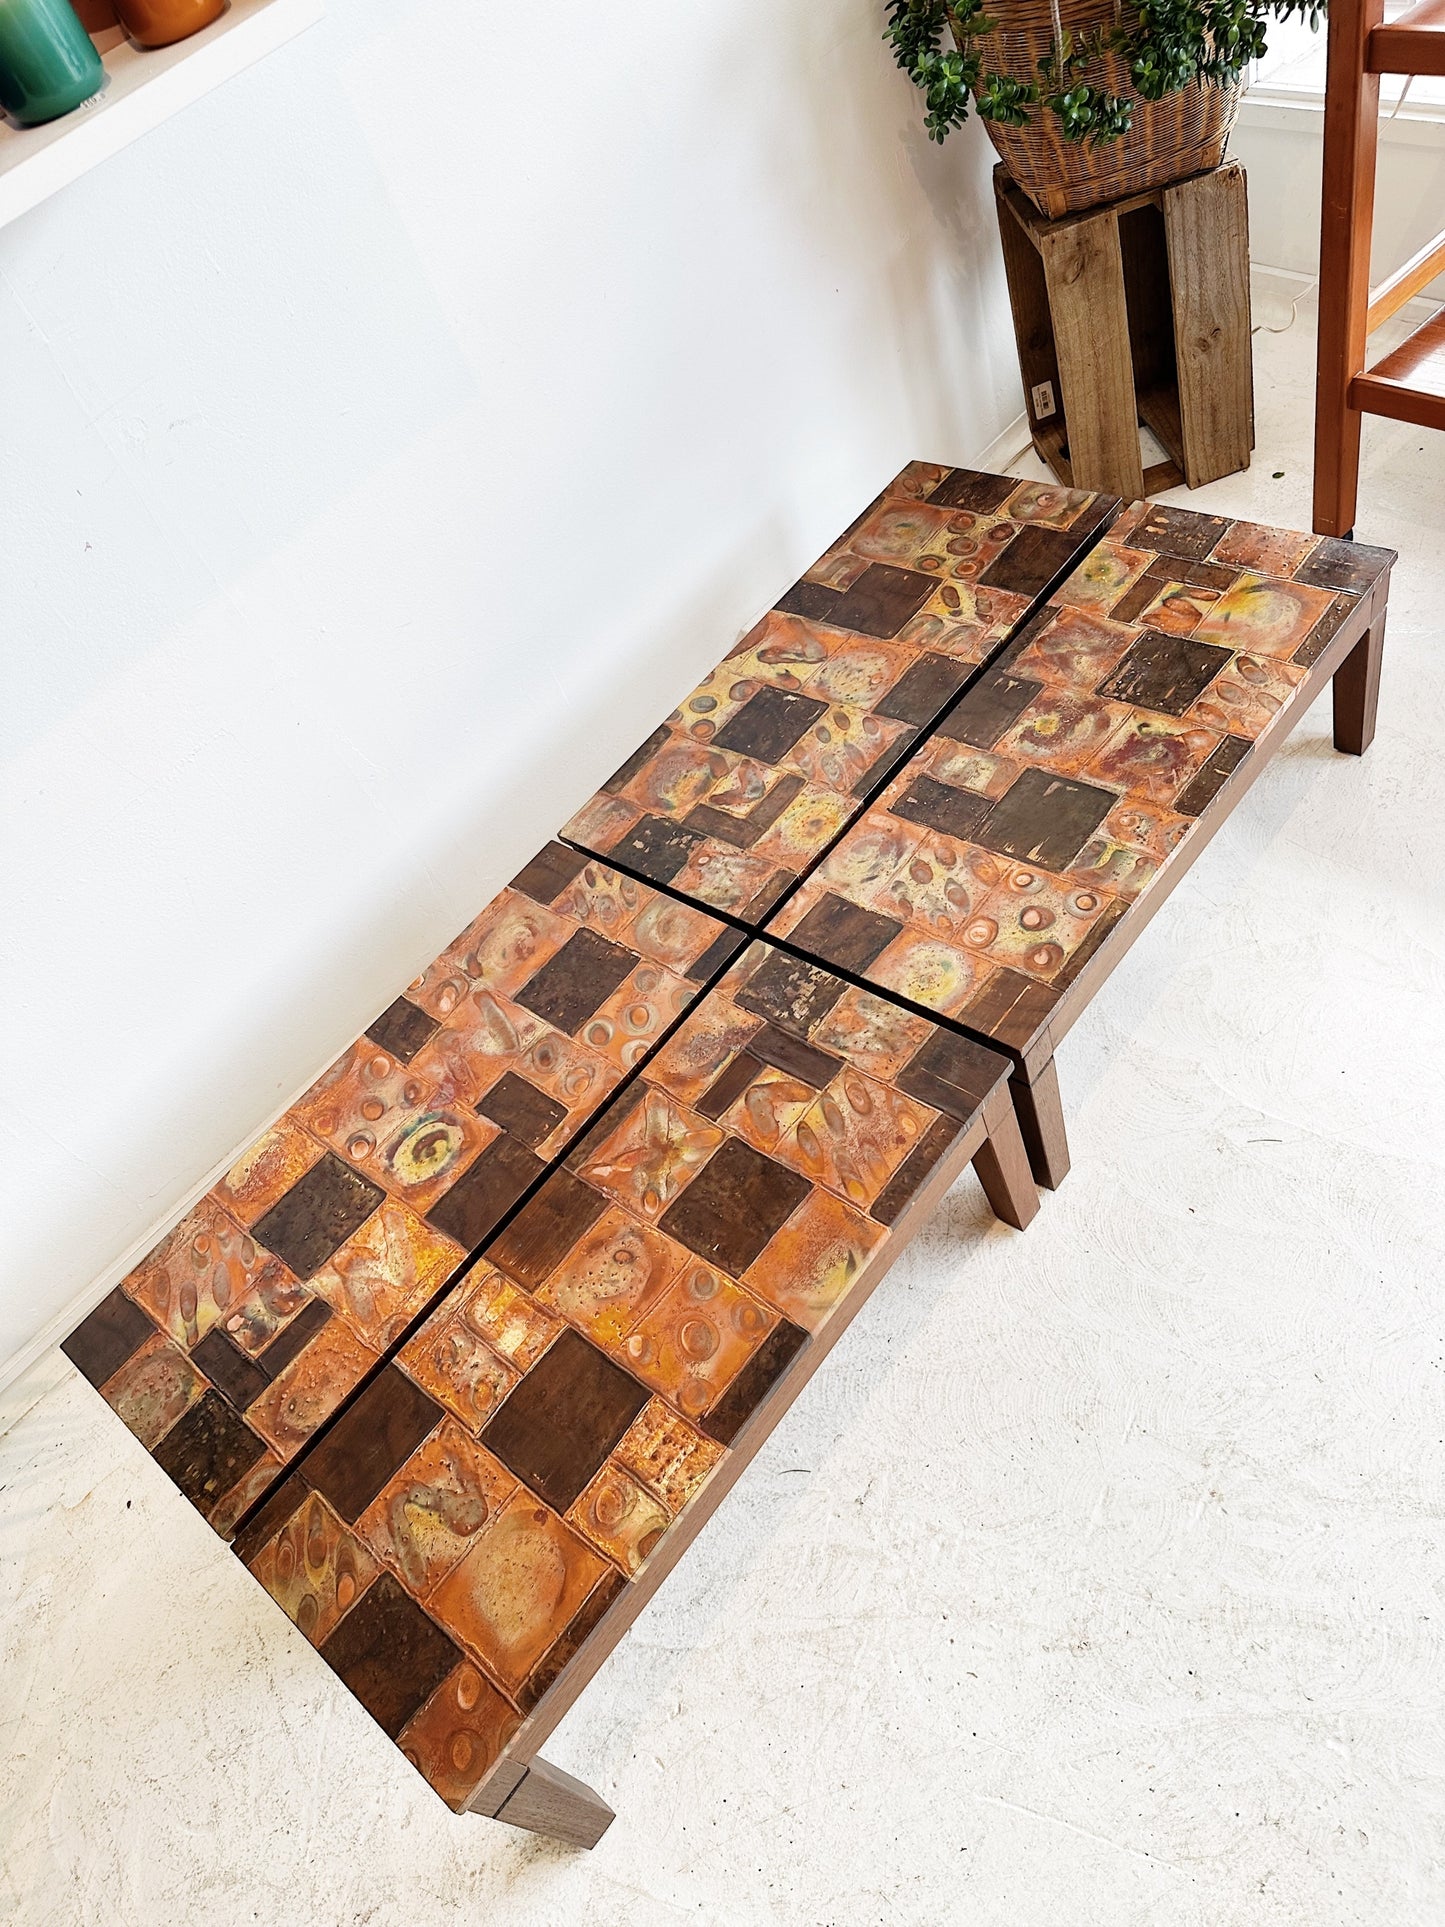 50s Handmade Copper Art Coffee Table / $75 EACH / 4 AVAILABLE